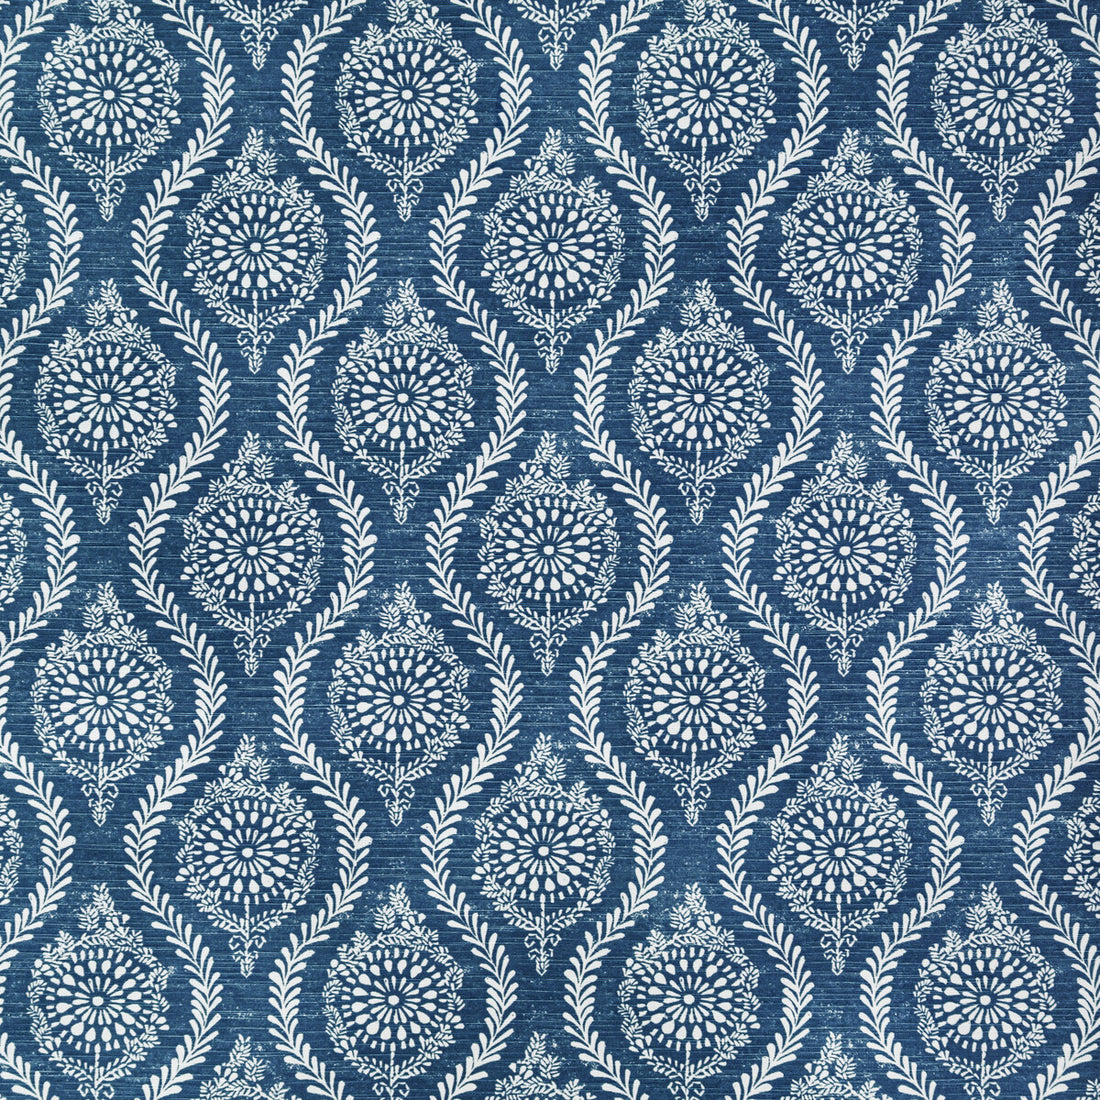 Marindol Print fabric in blue color - pattern 8022105.5.0 - by Brunschwig &amp; Fils in the Manoir collection